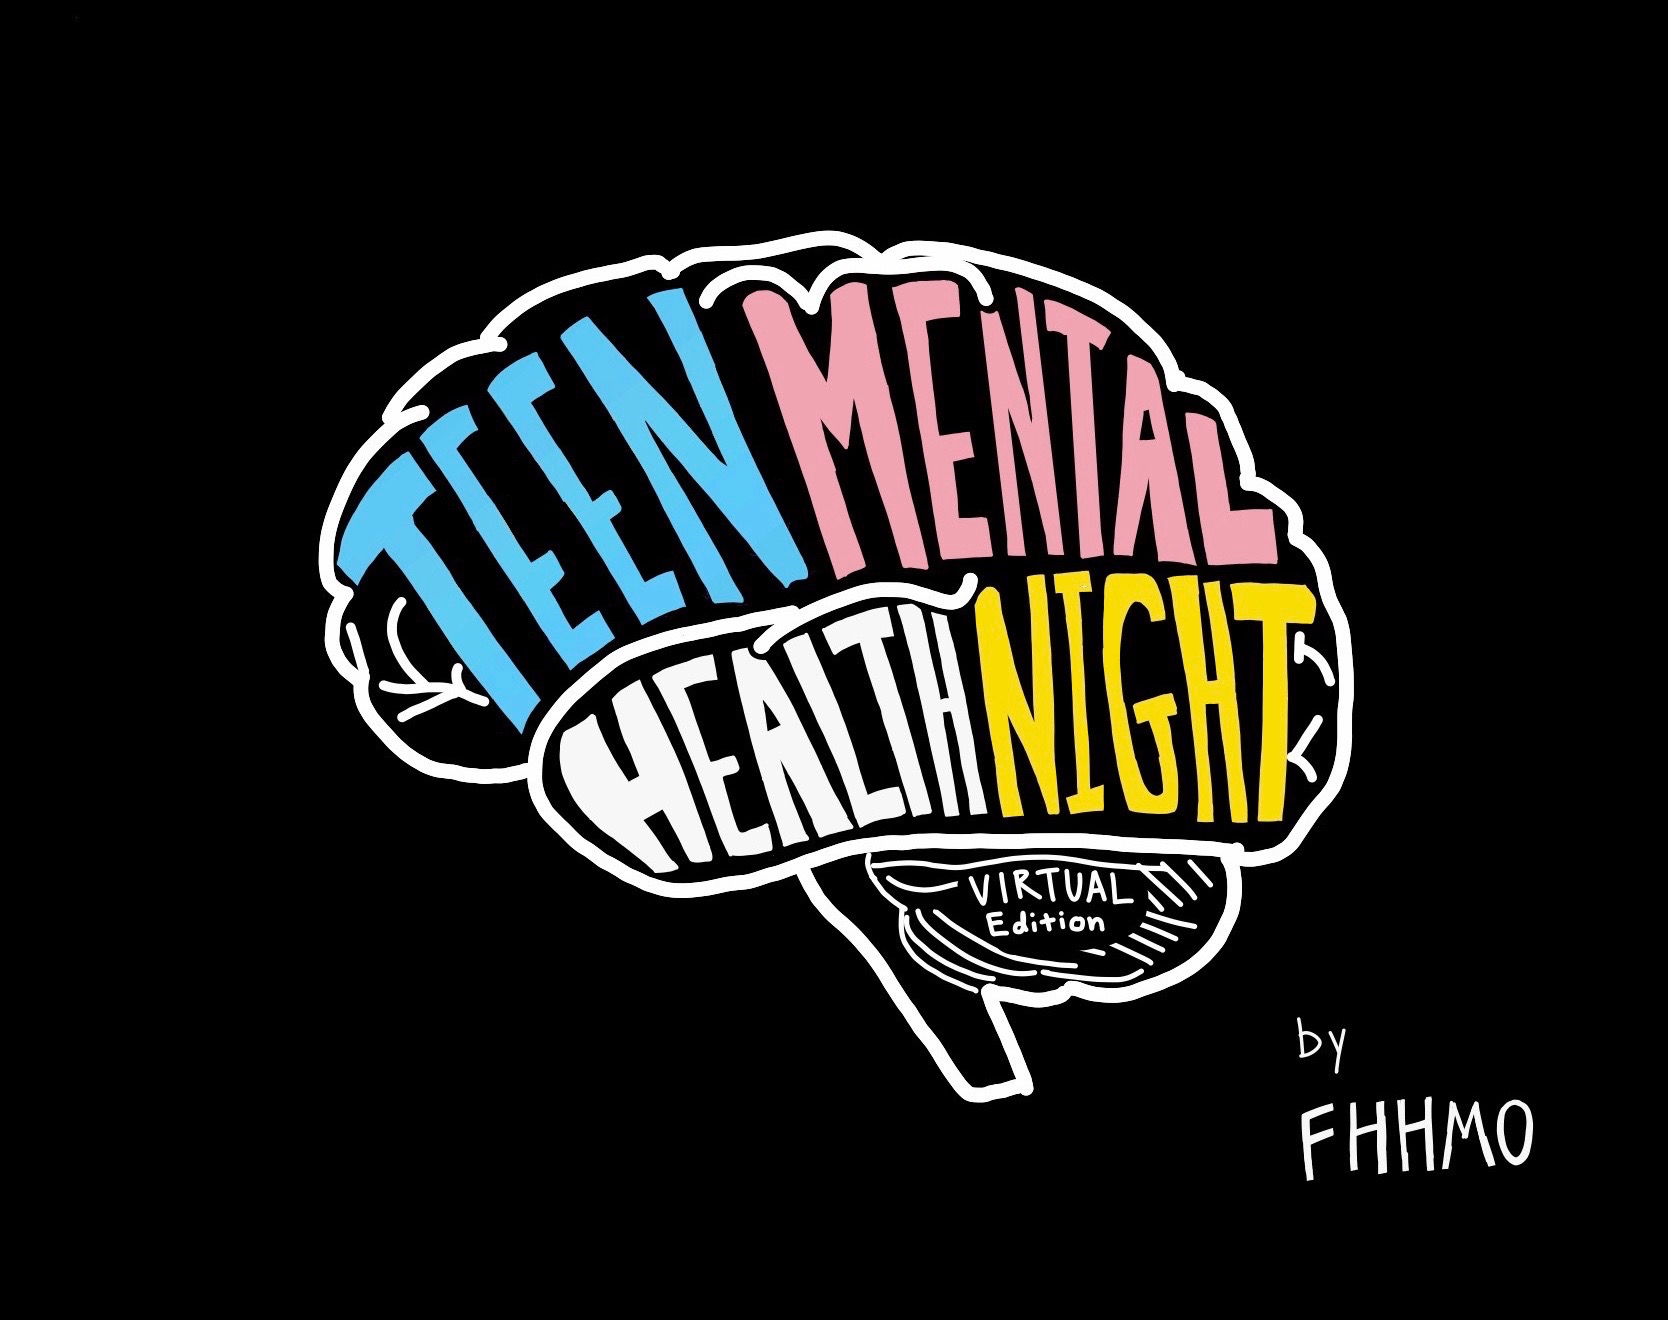 Teen Mental Health Night. An anonymous live-stream event